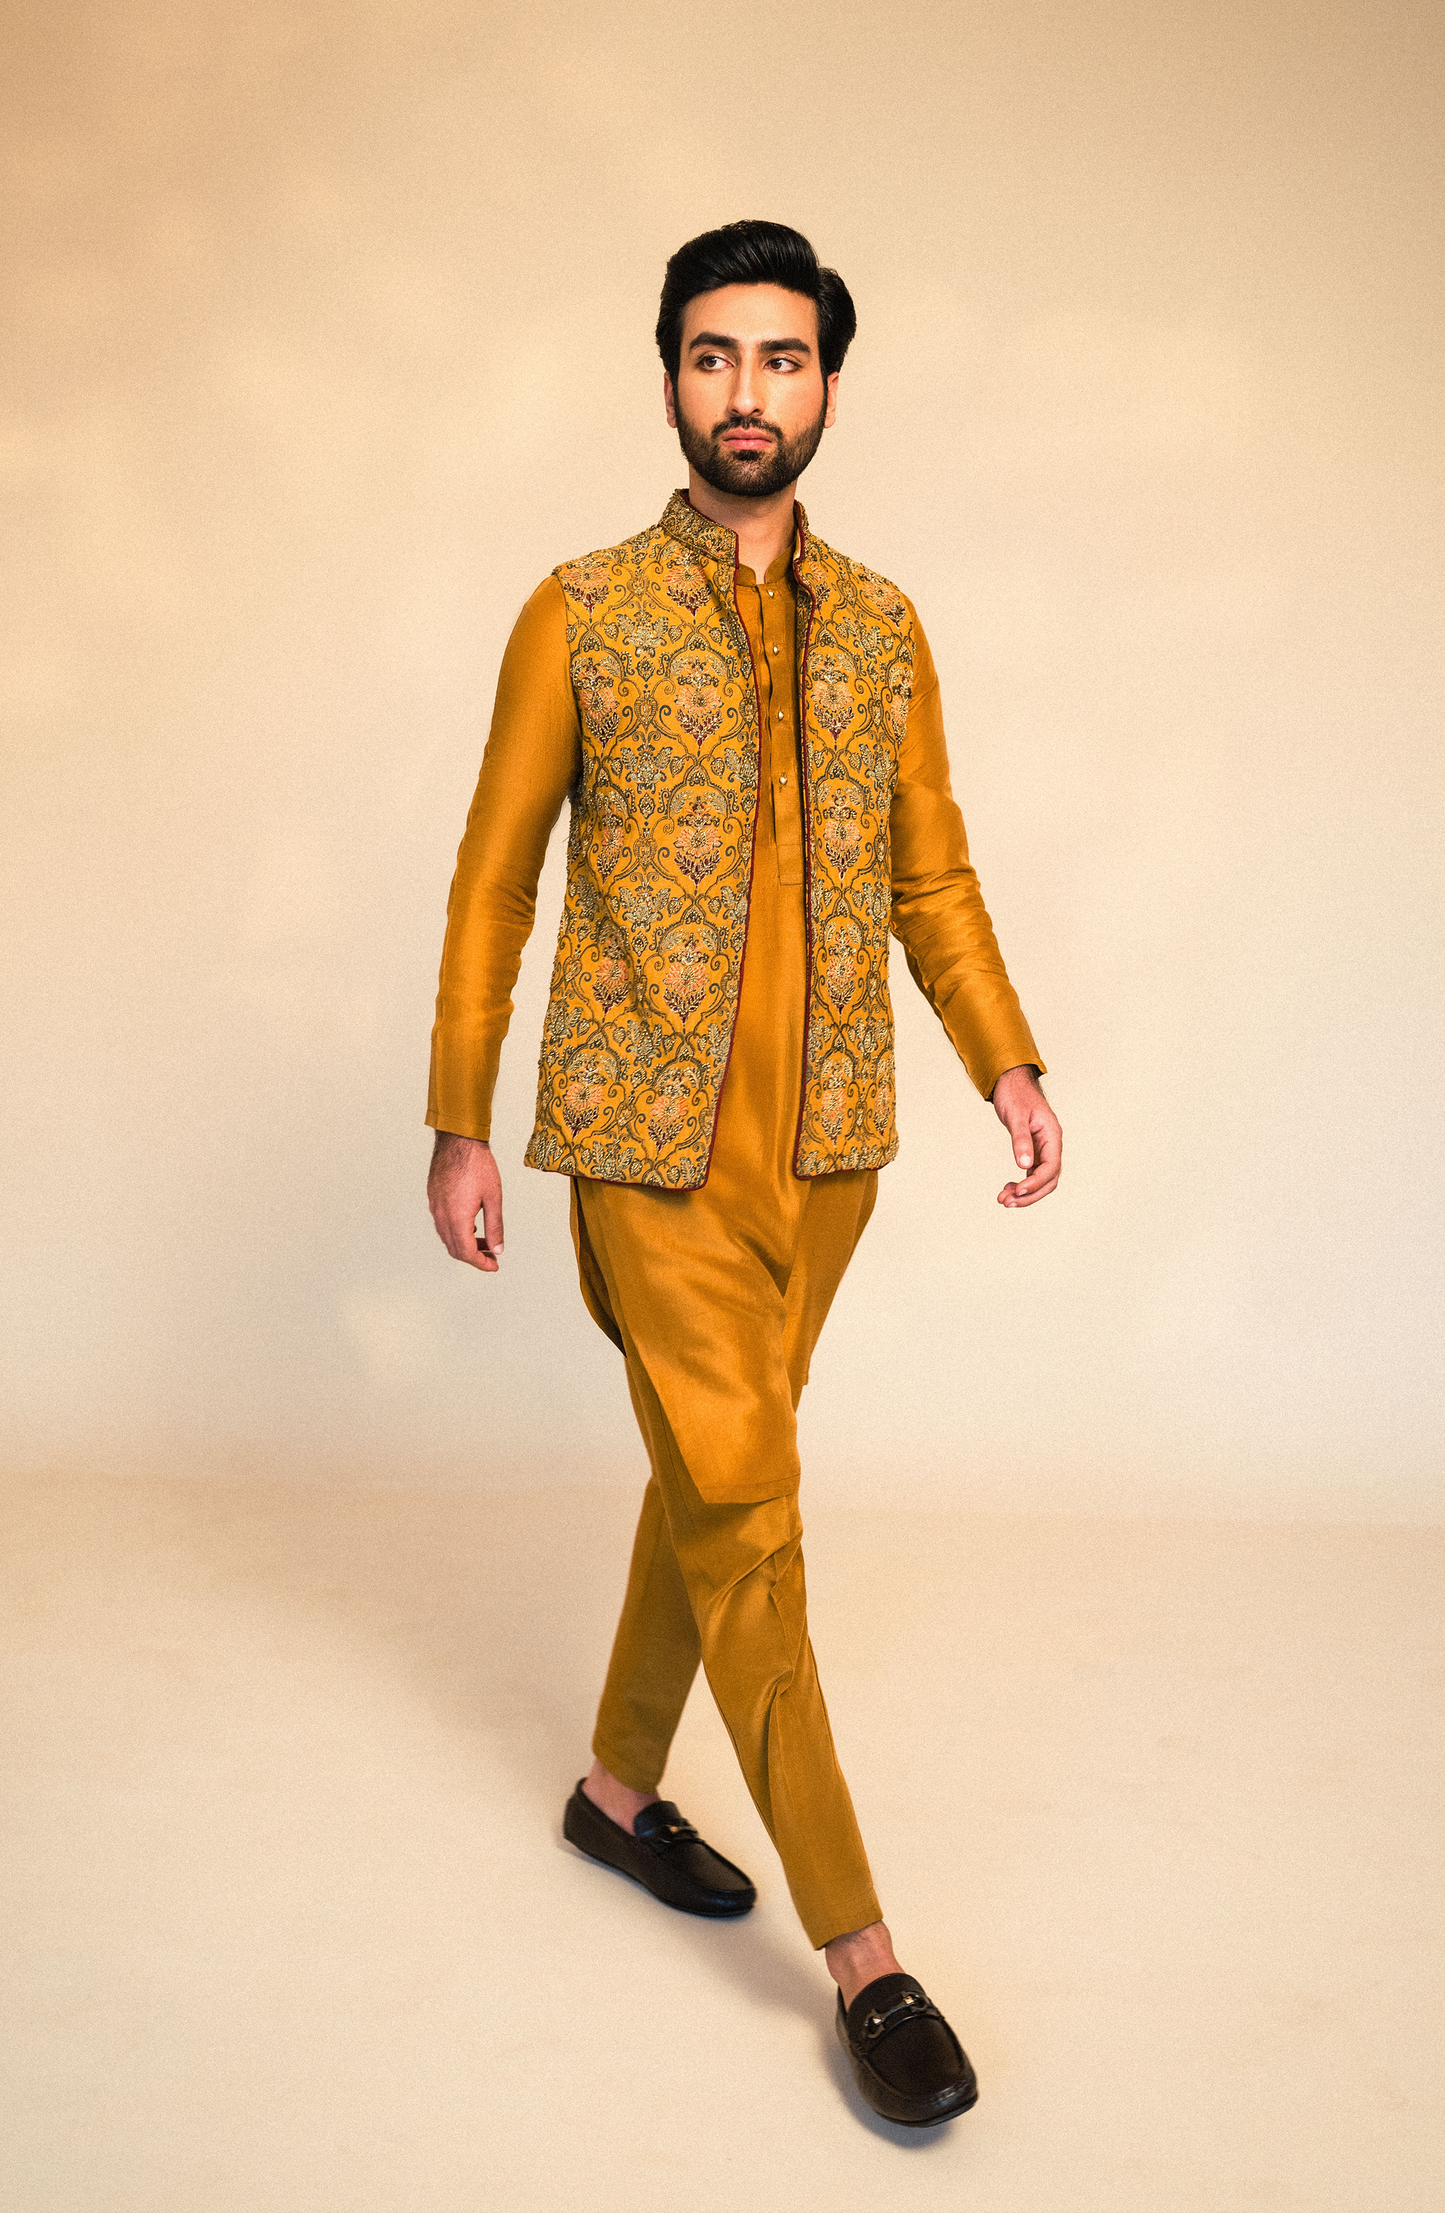 HSY prince coat for wedding